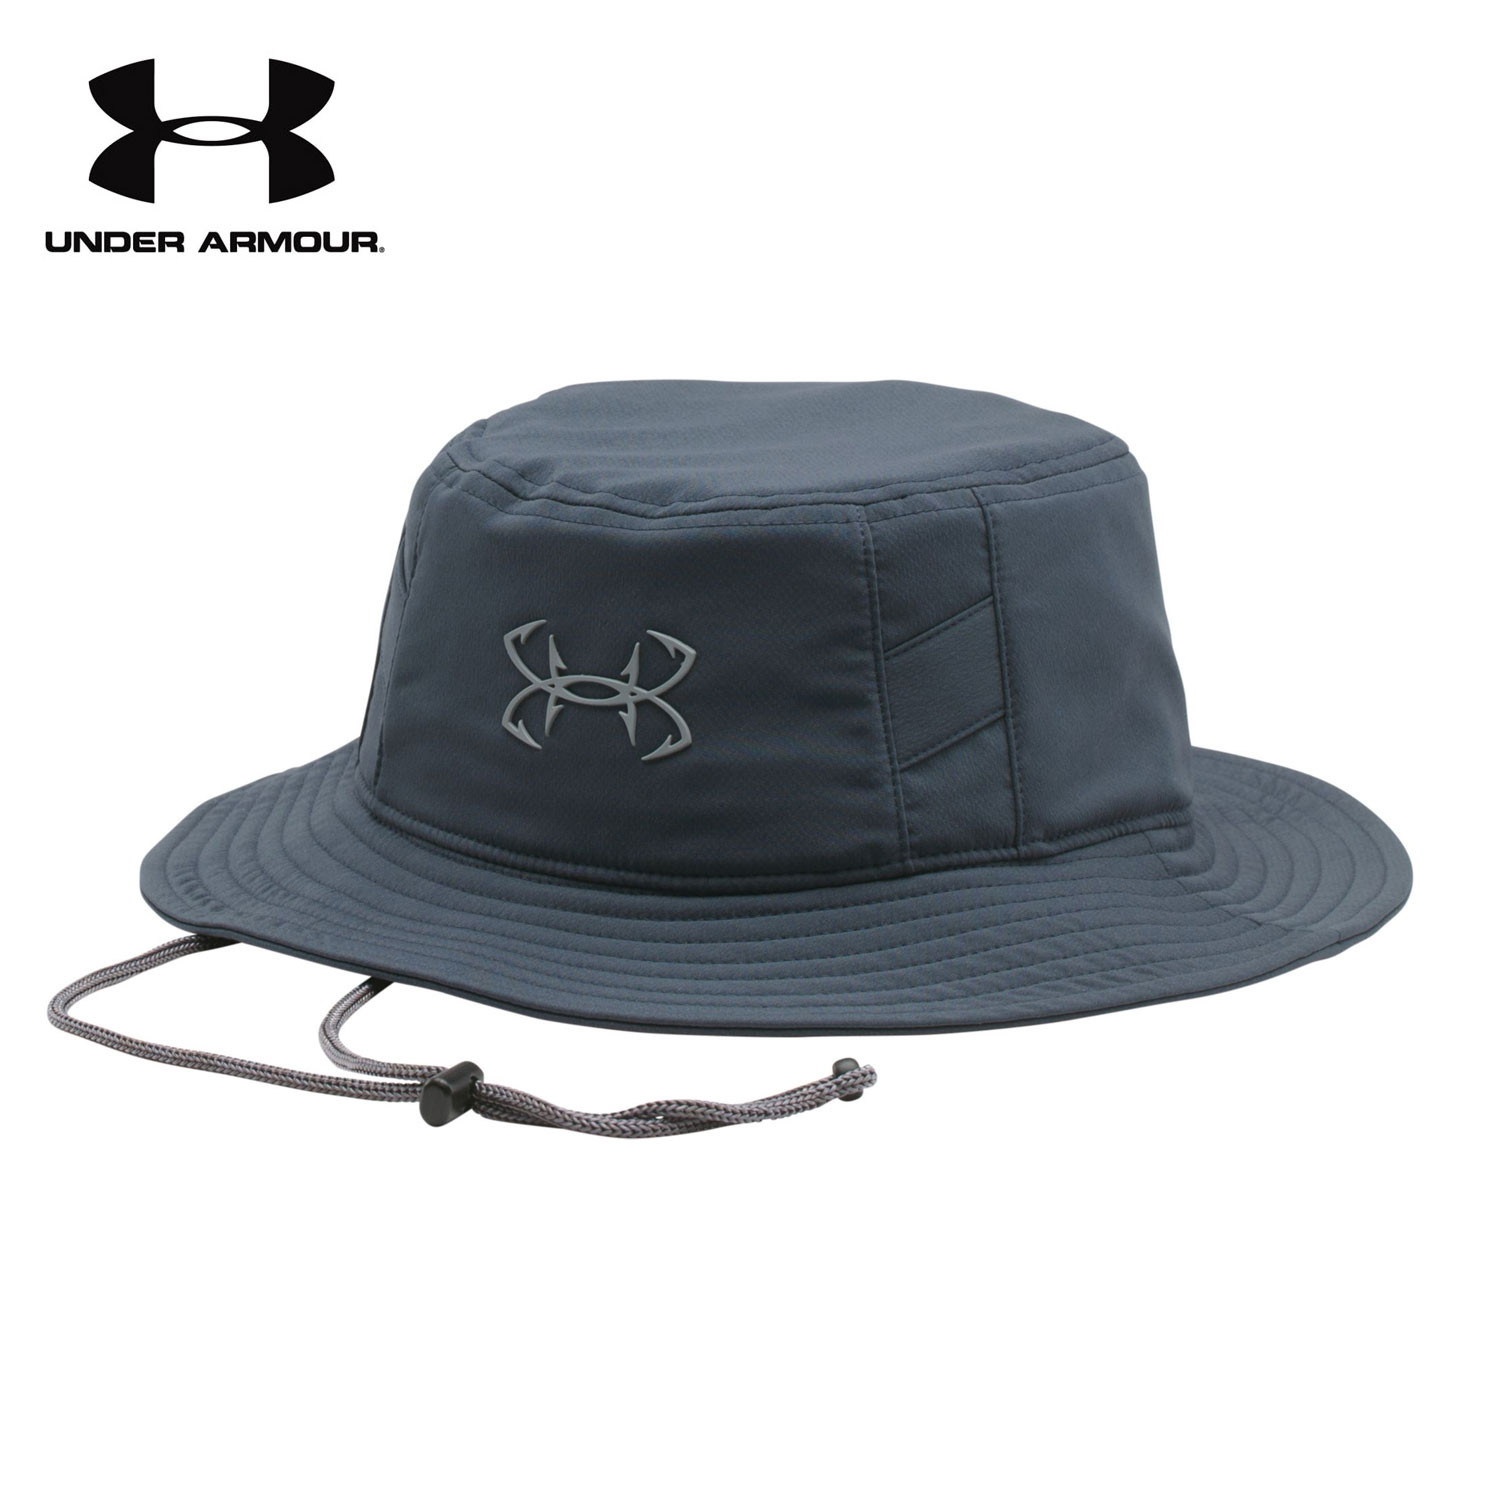 Under Armour Fish Hook Bucket Hat- Stealth Gray